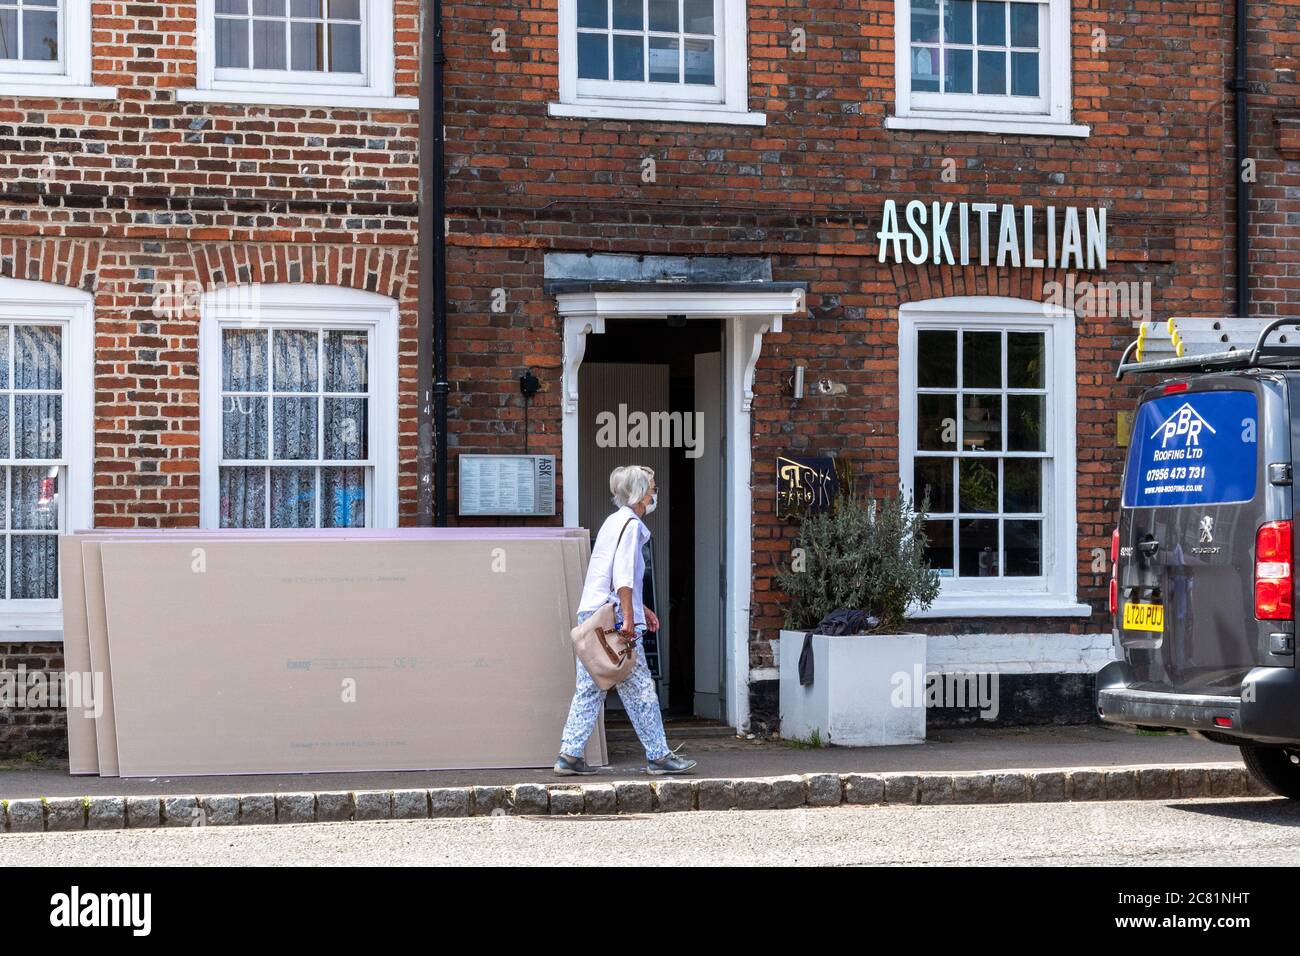 20th July 2020. Old Amersham, Buckinghamshire, UK. The ASK Italian and Zizzi restaurant chain announced 2 days ago they are permanently closing 75 restaurants due to loss of income during the coronavirus covid-19 pandemic lockdown. A woman wearing a face mask walks past an ASK Italian restaurant while it is about to be boarded up. Stock Photo